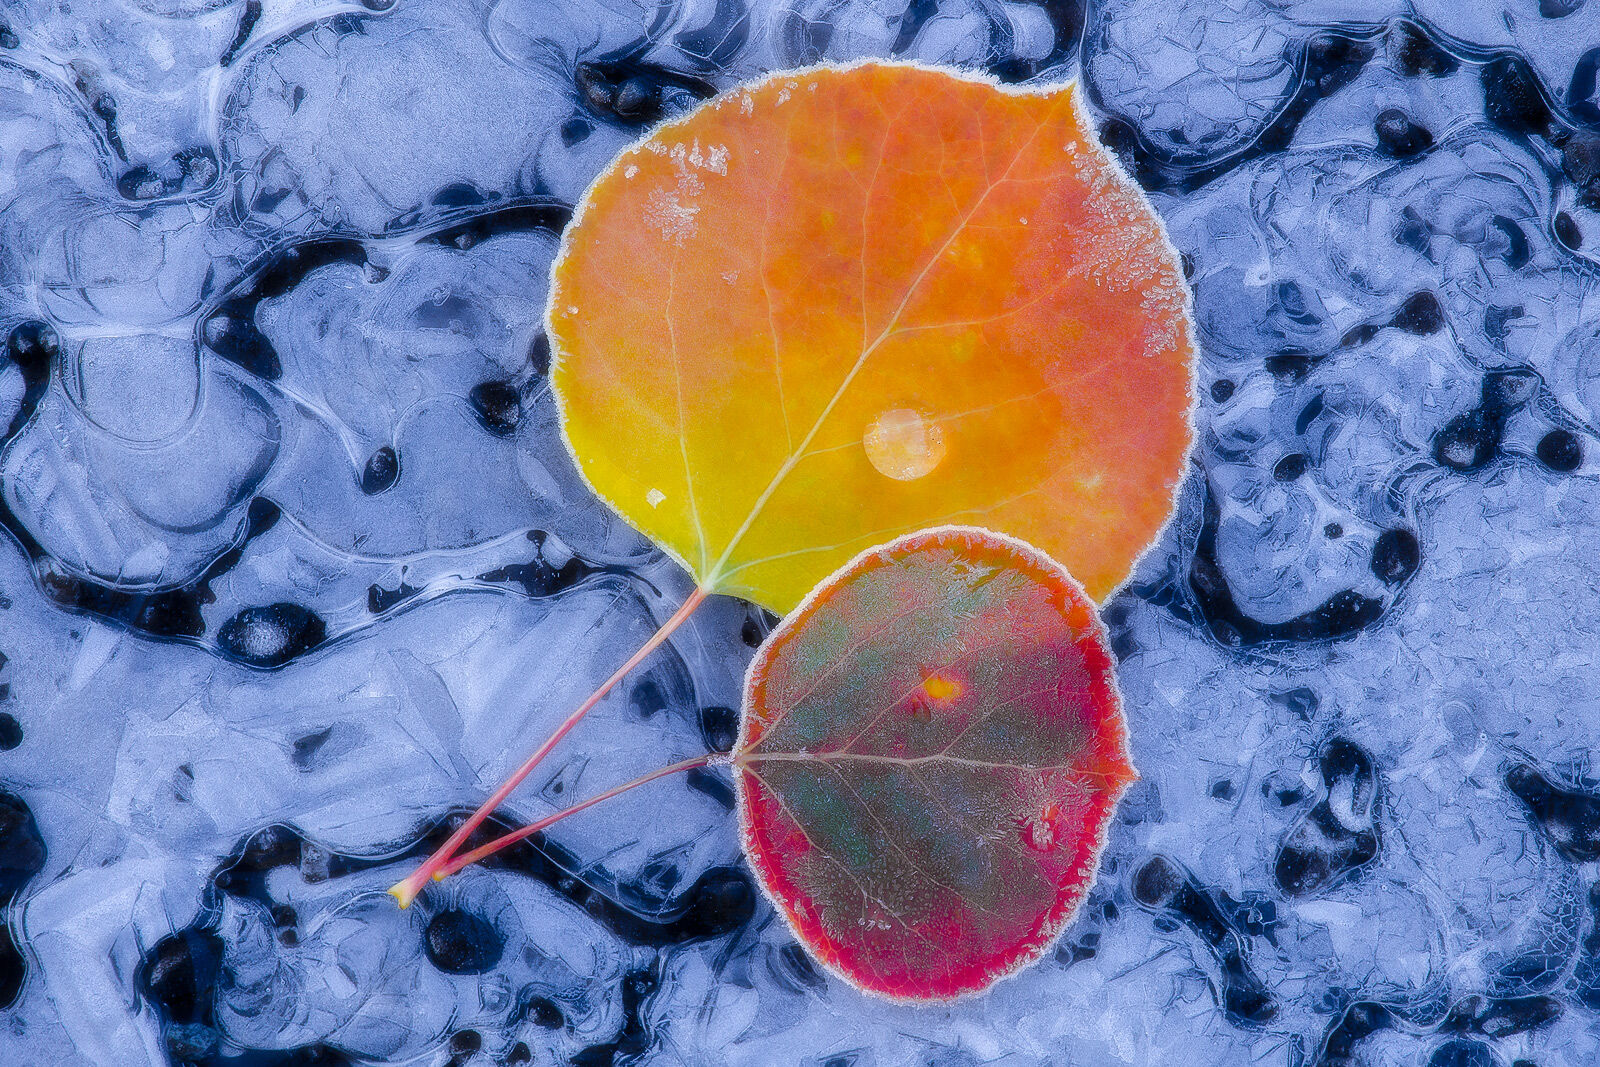 A yellowish orange and red aspen leaves sit on top of a crackly ice surface with frost around their edges and seemingly creeping in.